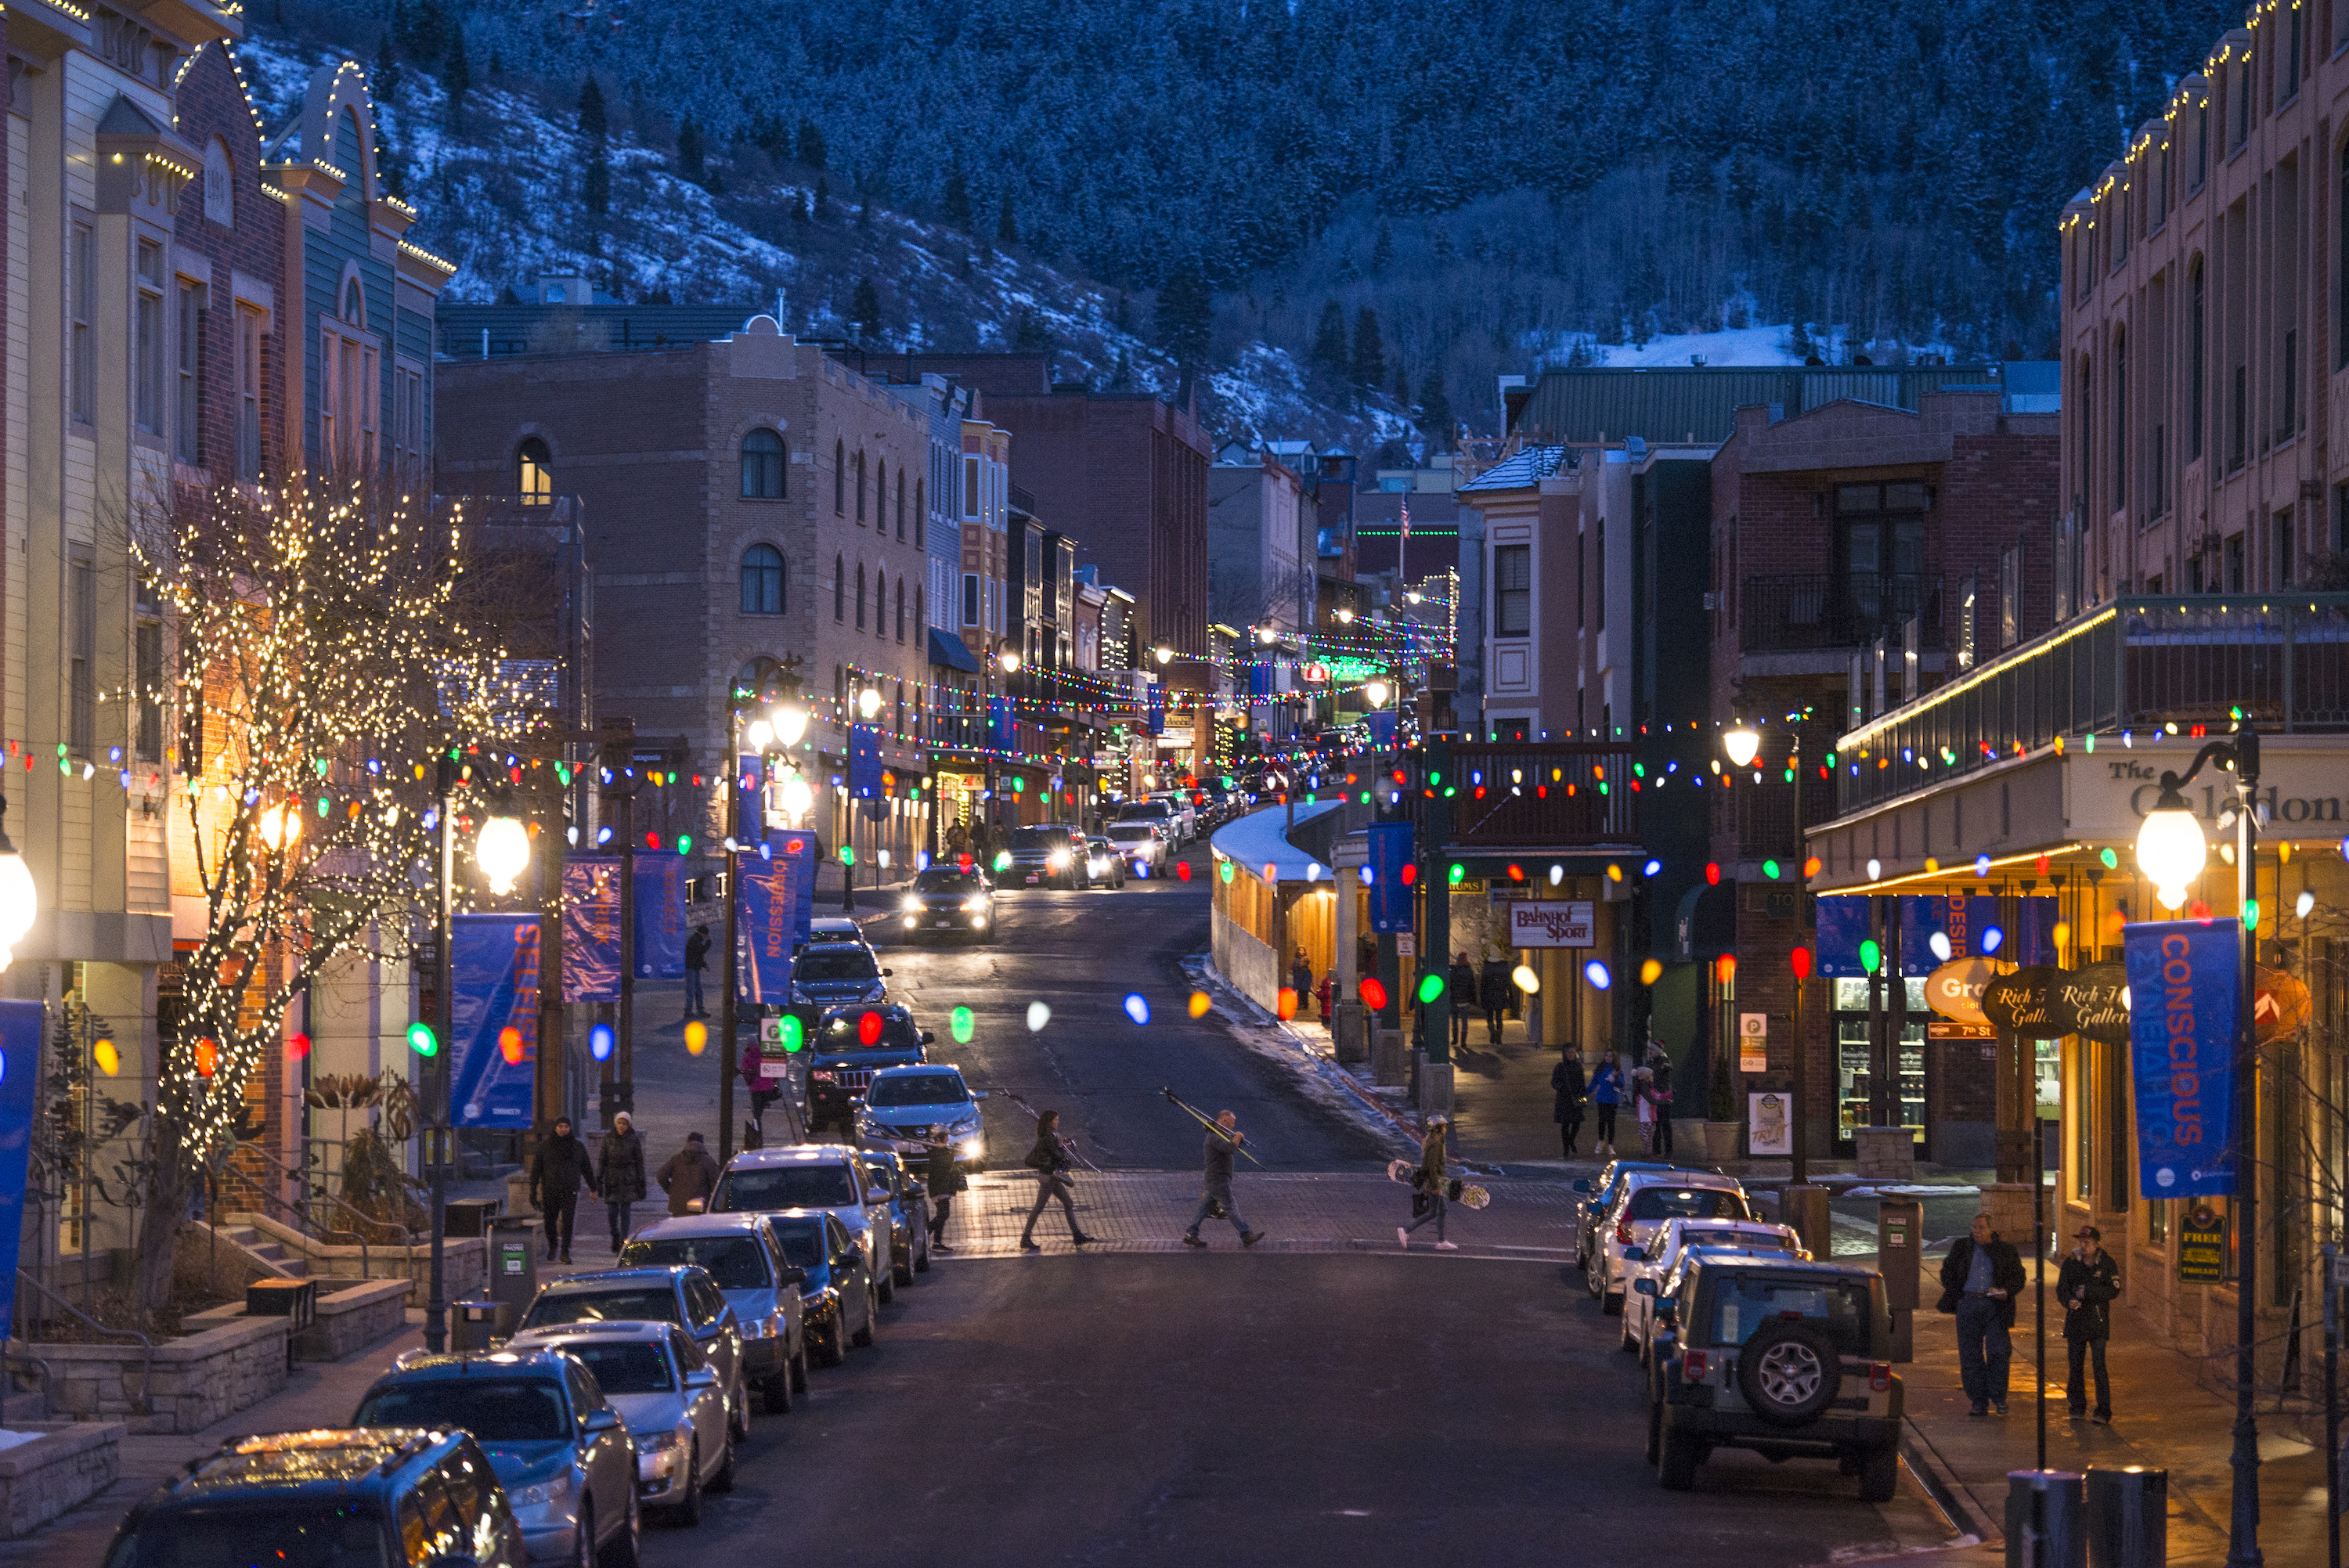  A visitor's indispensable guide to Park City, Utah 